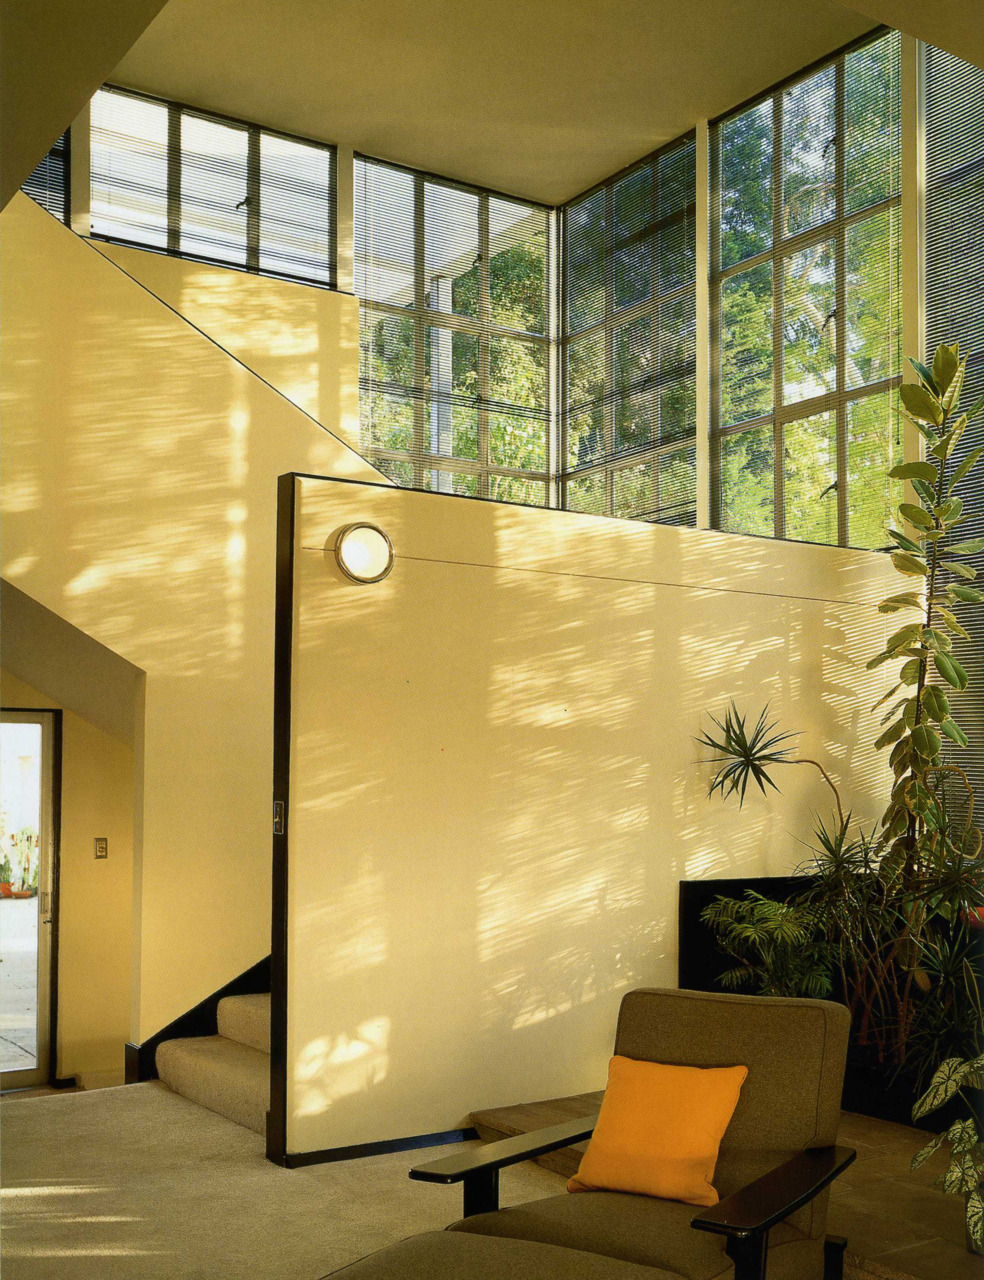 vdvintagedesign:
“ The Lovell House, Los Angeles, California, United States of America - Richard Neutra (1929)
”